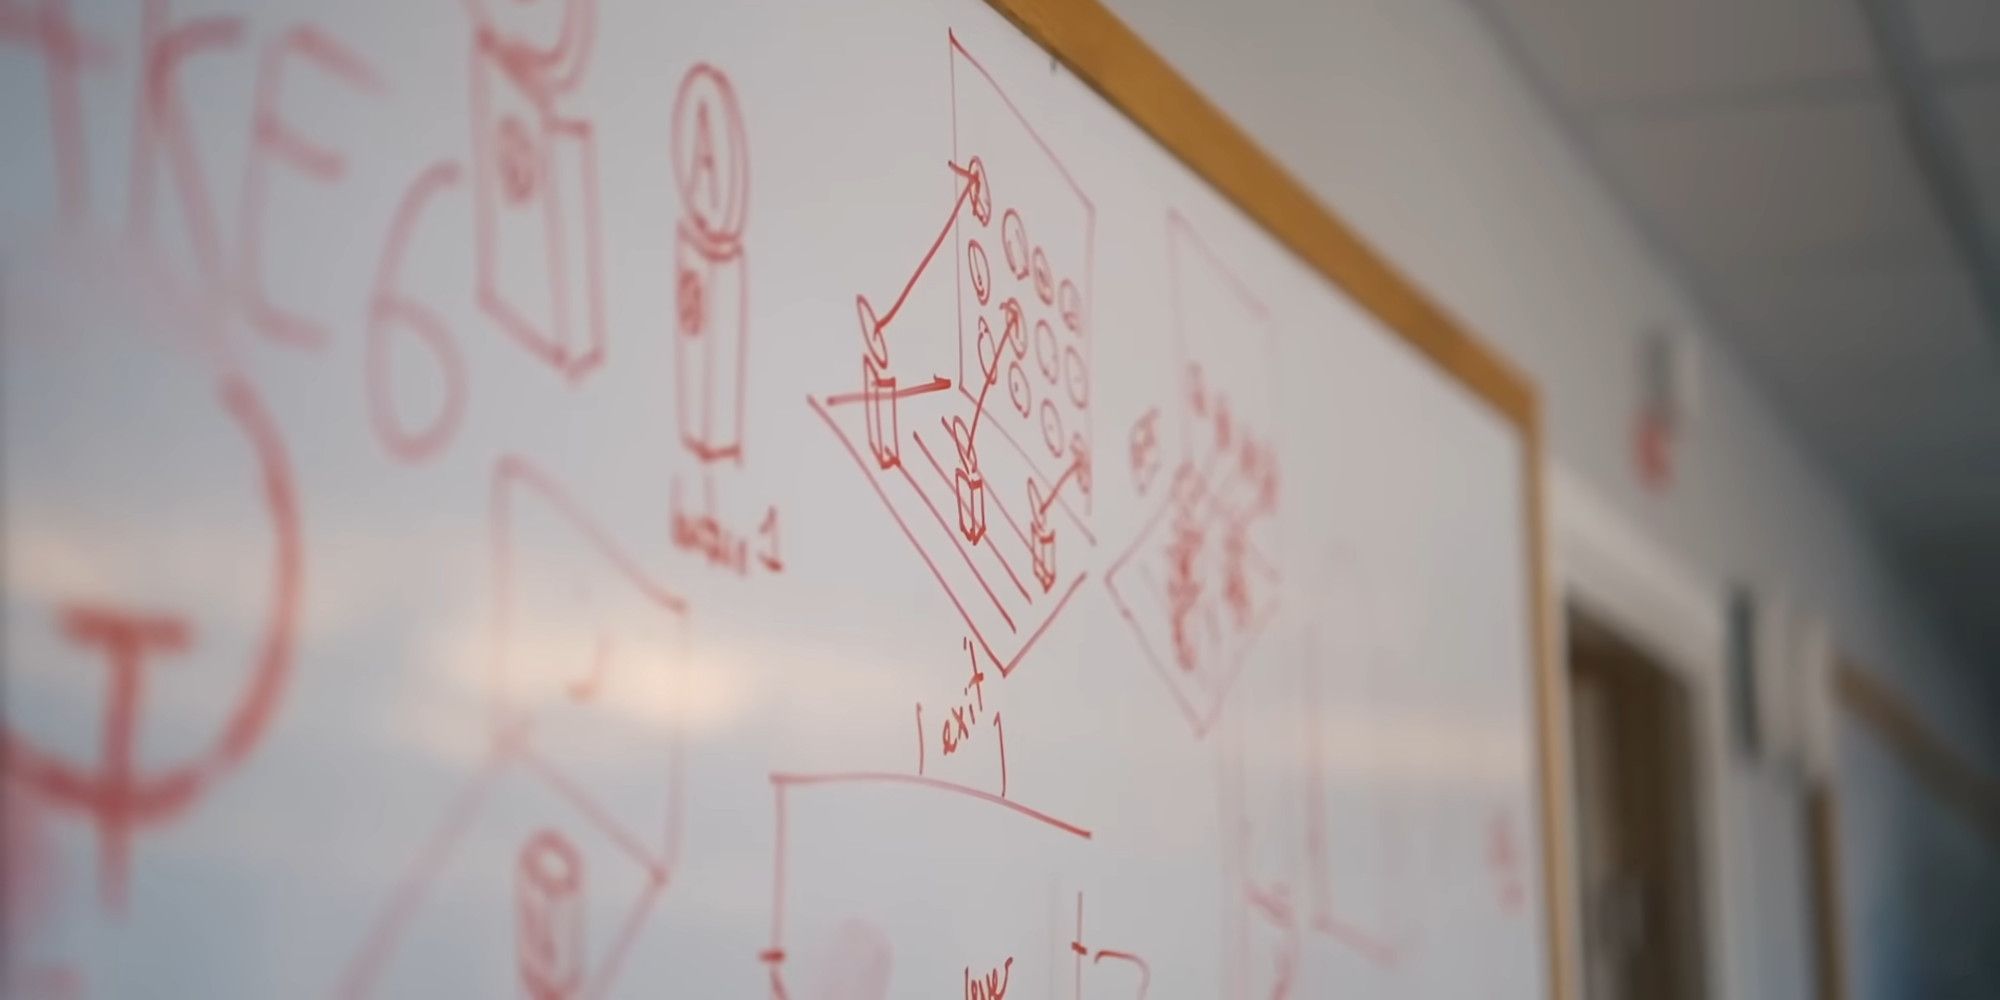 A whiteboard covered in drawings and diagrams, with a quake logo on the left half of the board